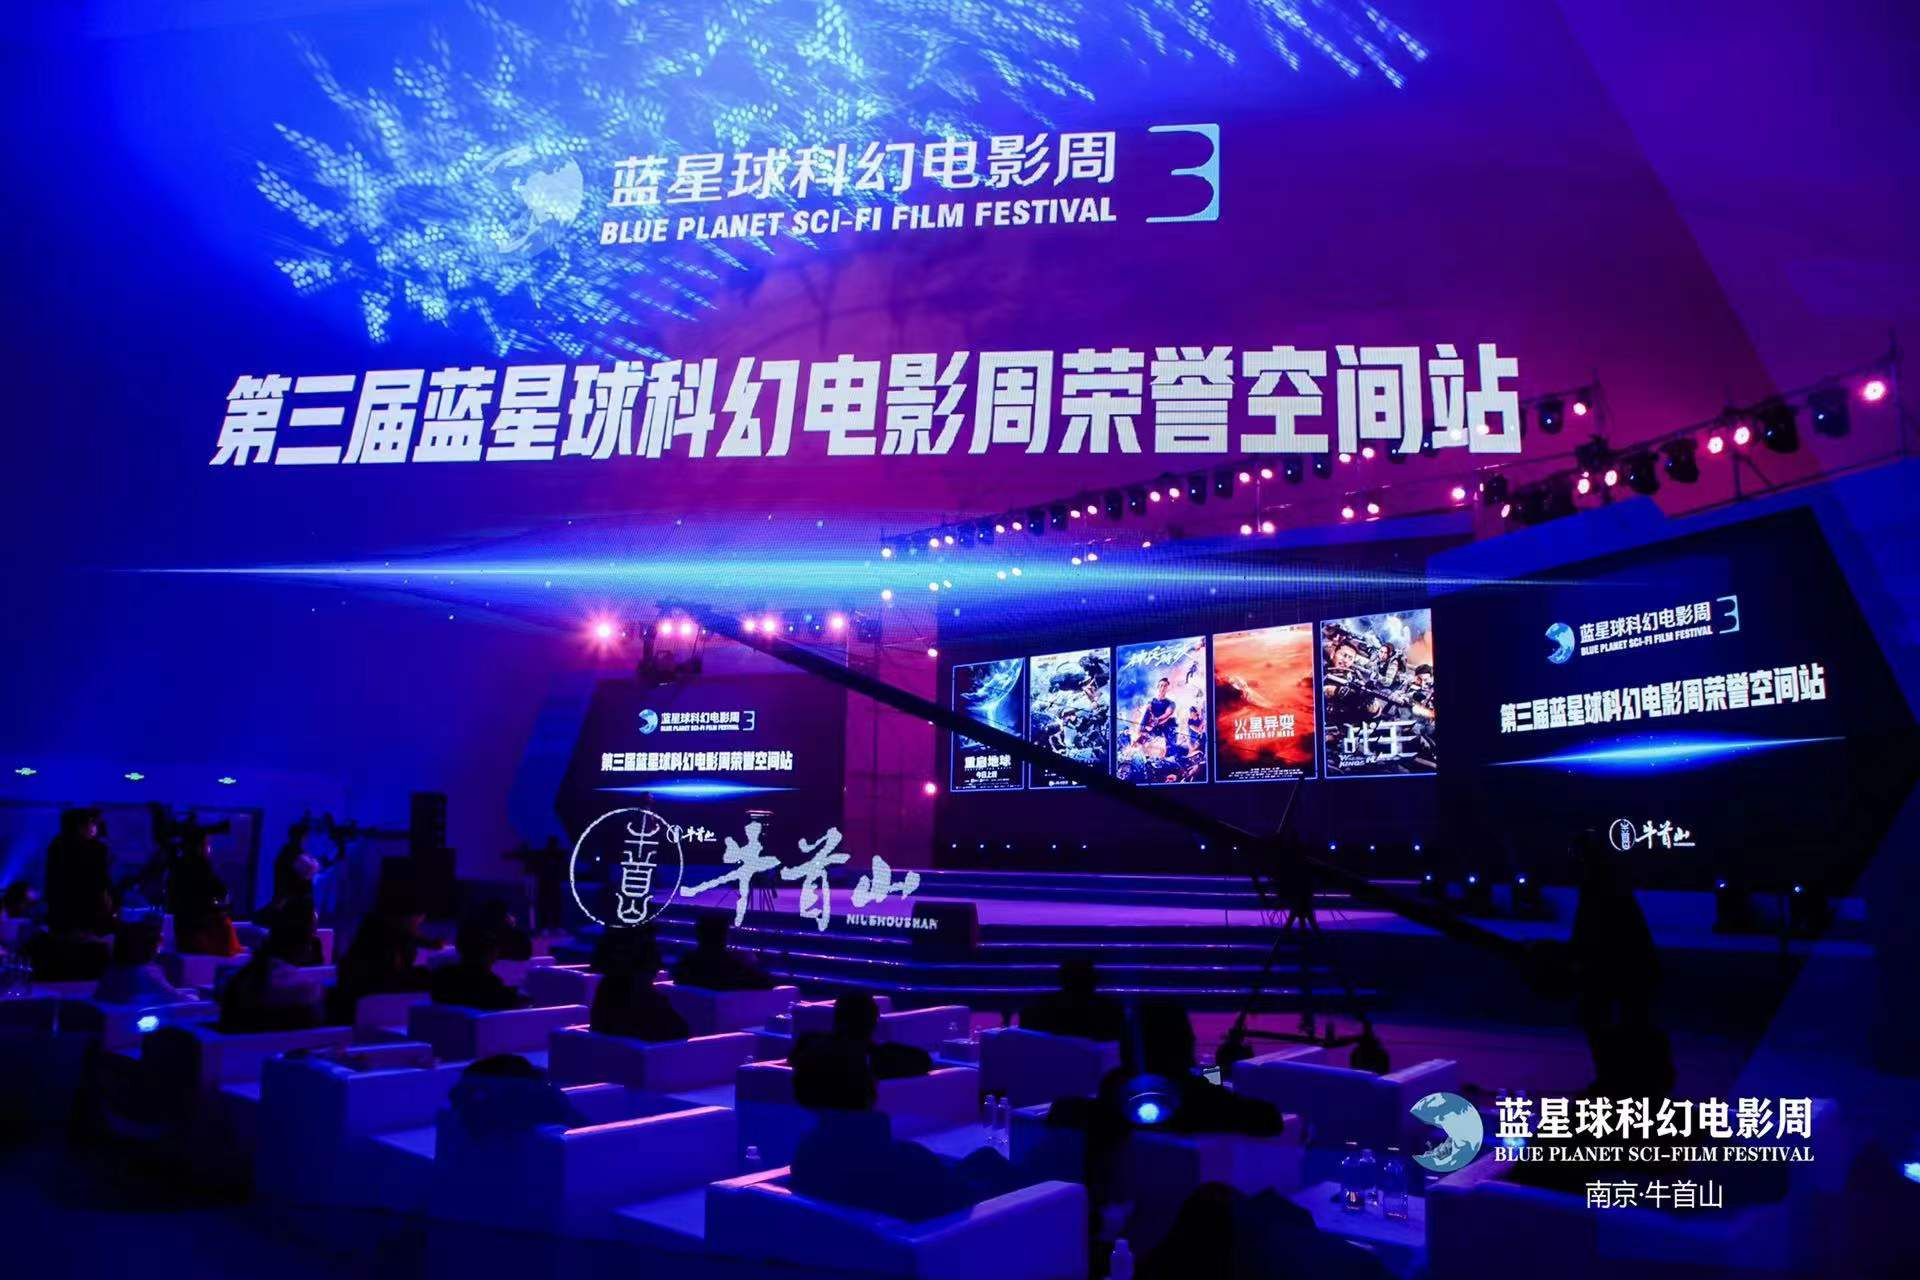 Forfatning brændt Wow Honorary Space Station” of the Third Blue Planet Science Fiction Film  Festival Docks Successfully in Niushou Mountain, Nanjing, China | Business  Wire